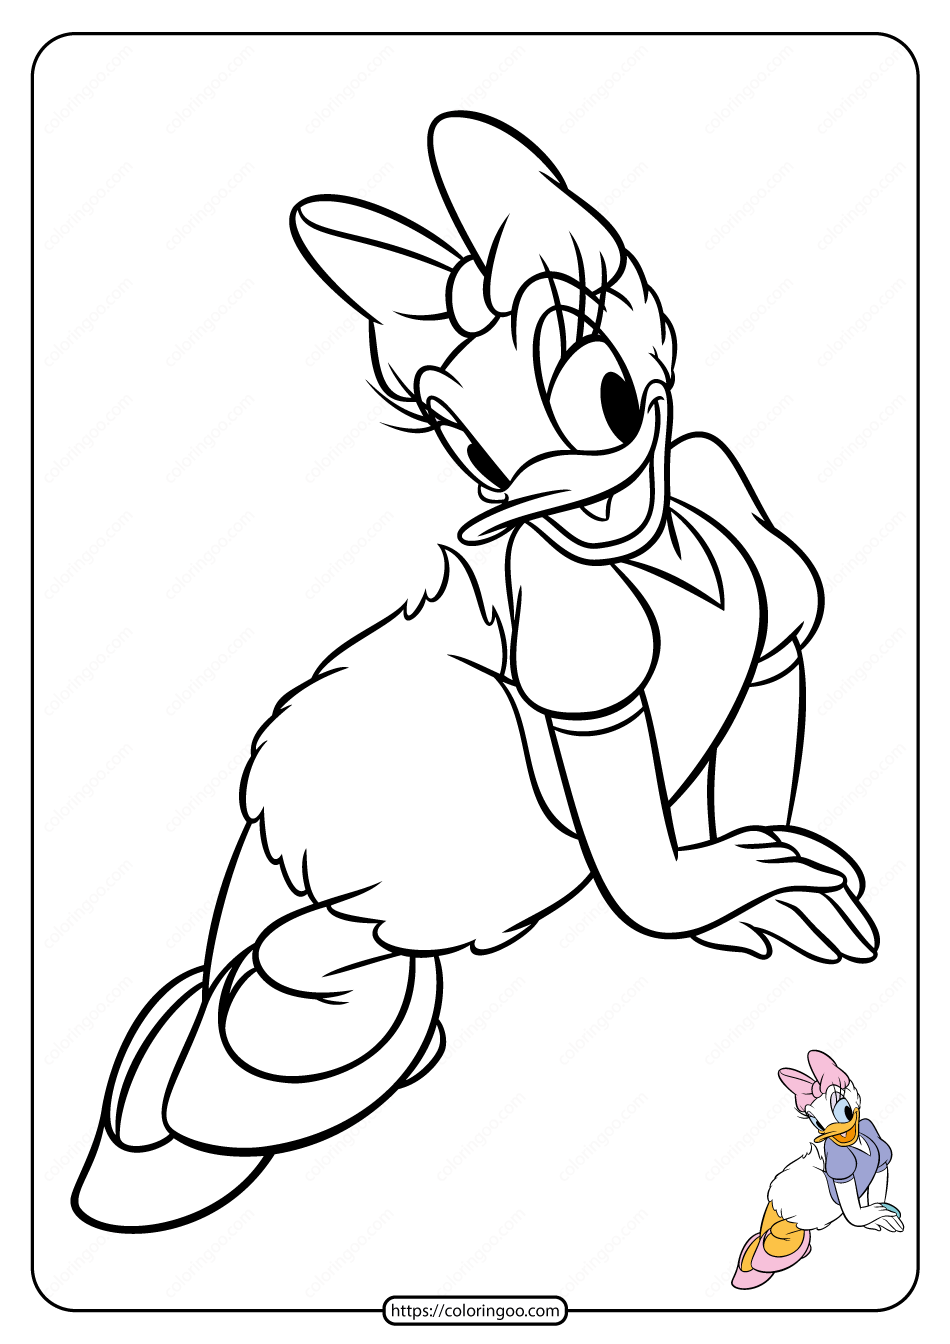 printable daisy duck pdf coloring page 12